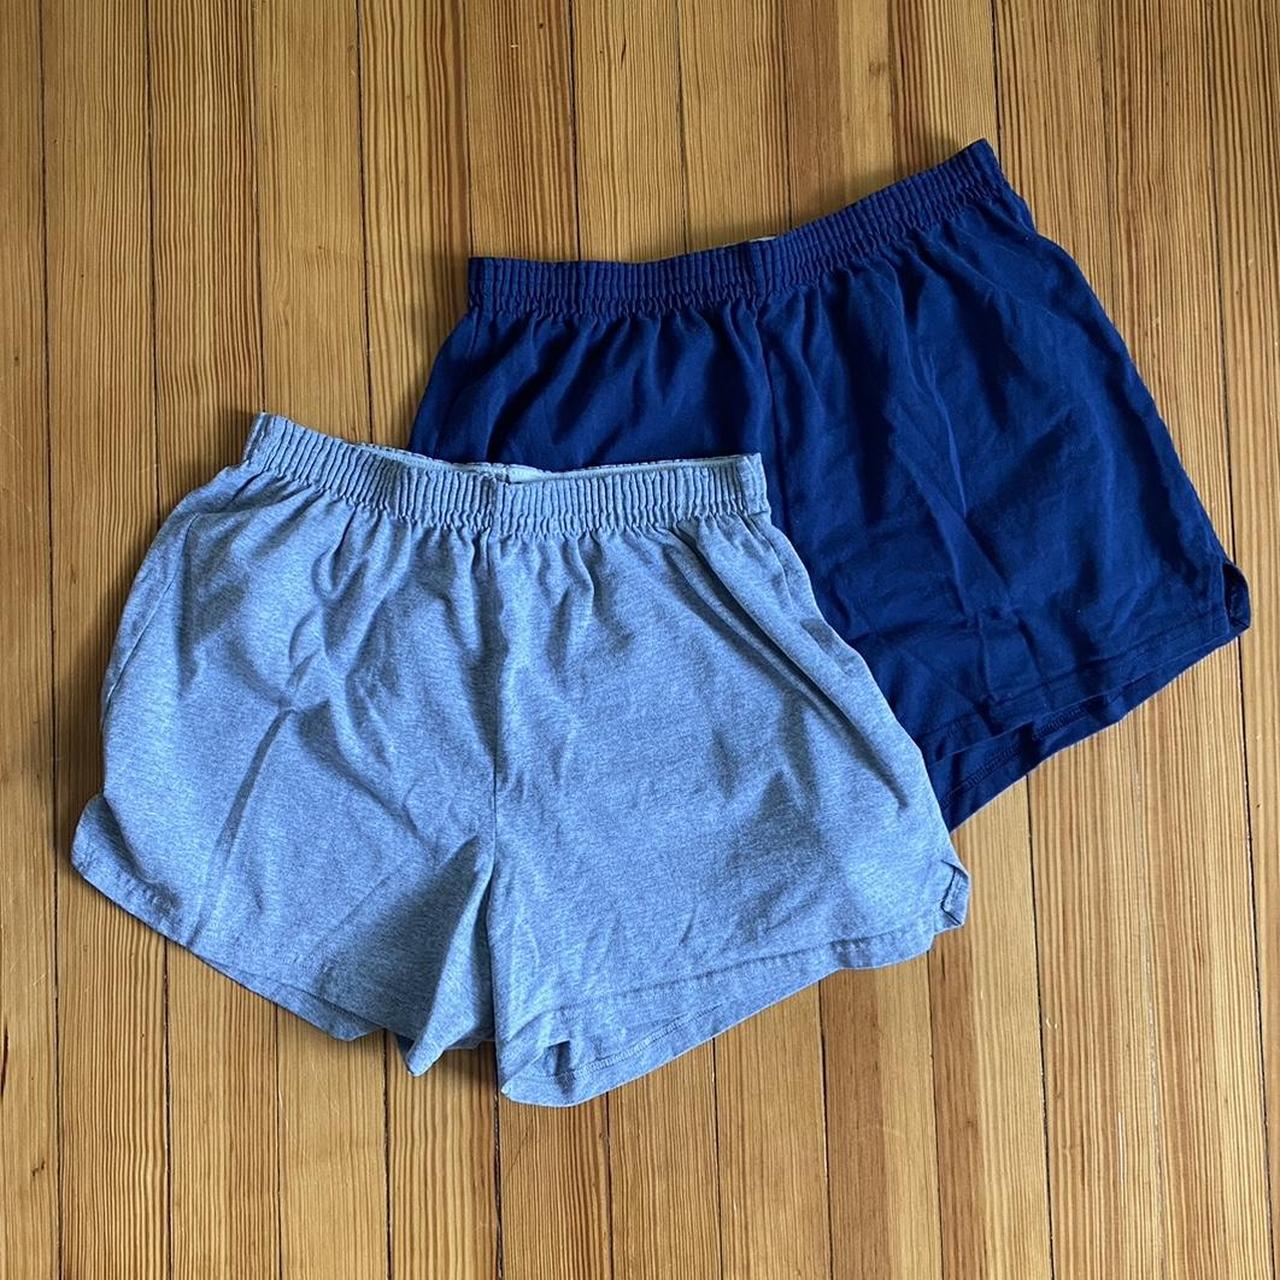 Soffe Women's Navy and Grey Shorts | Depop